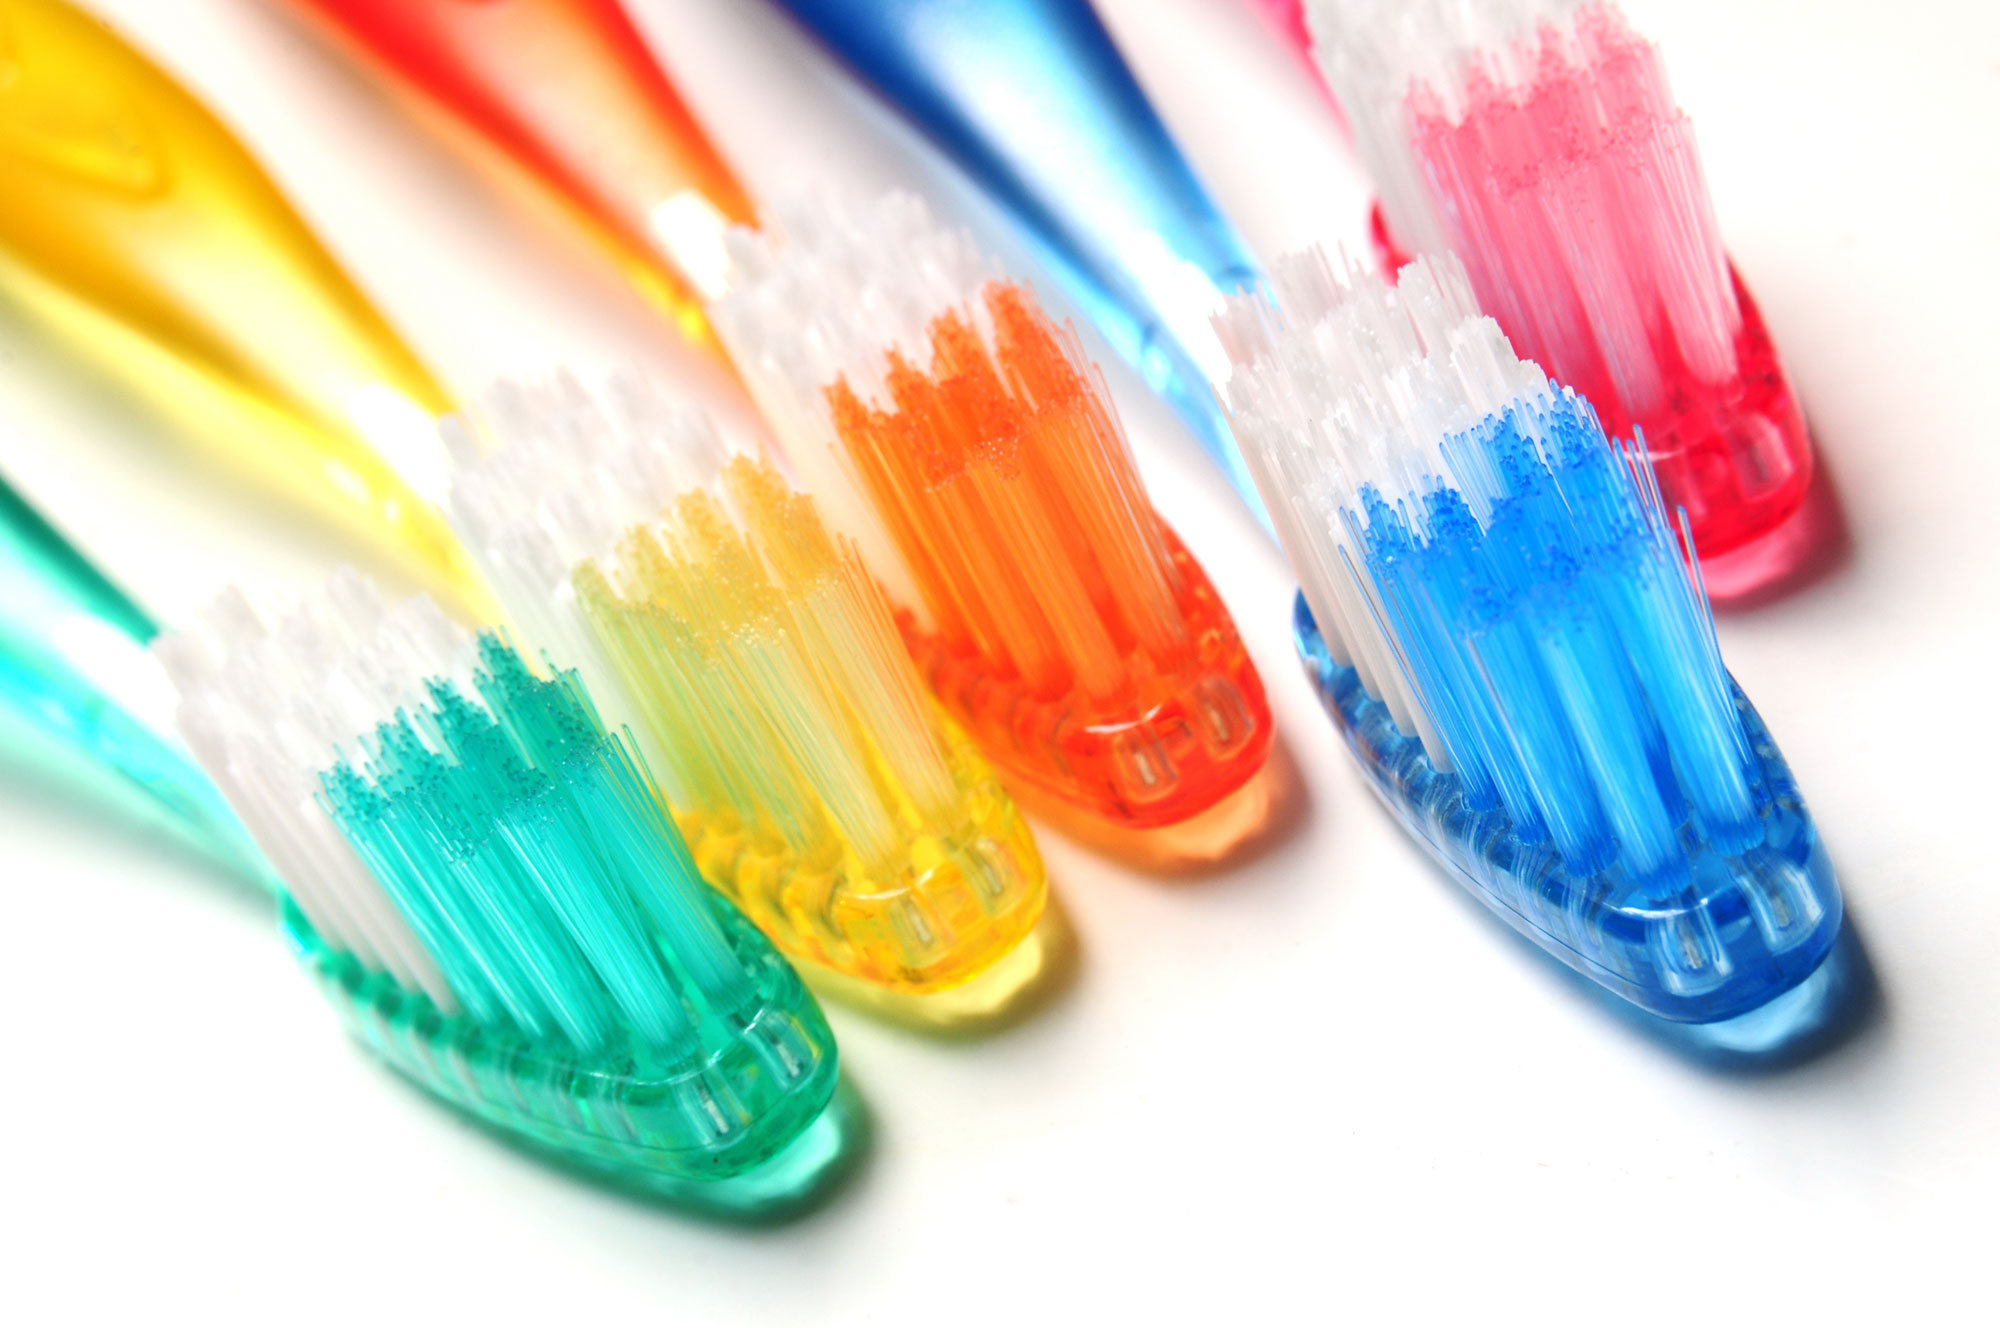 Multiple Colored Toothbrushes